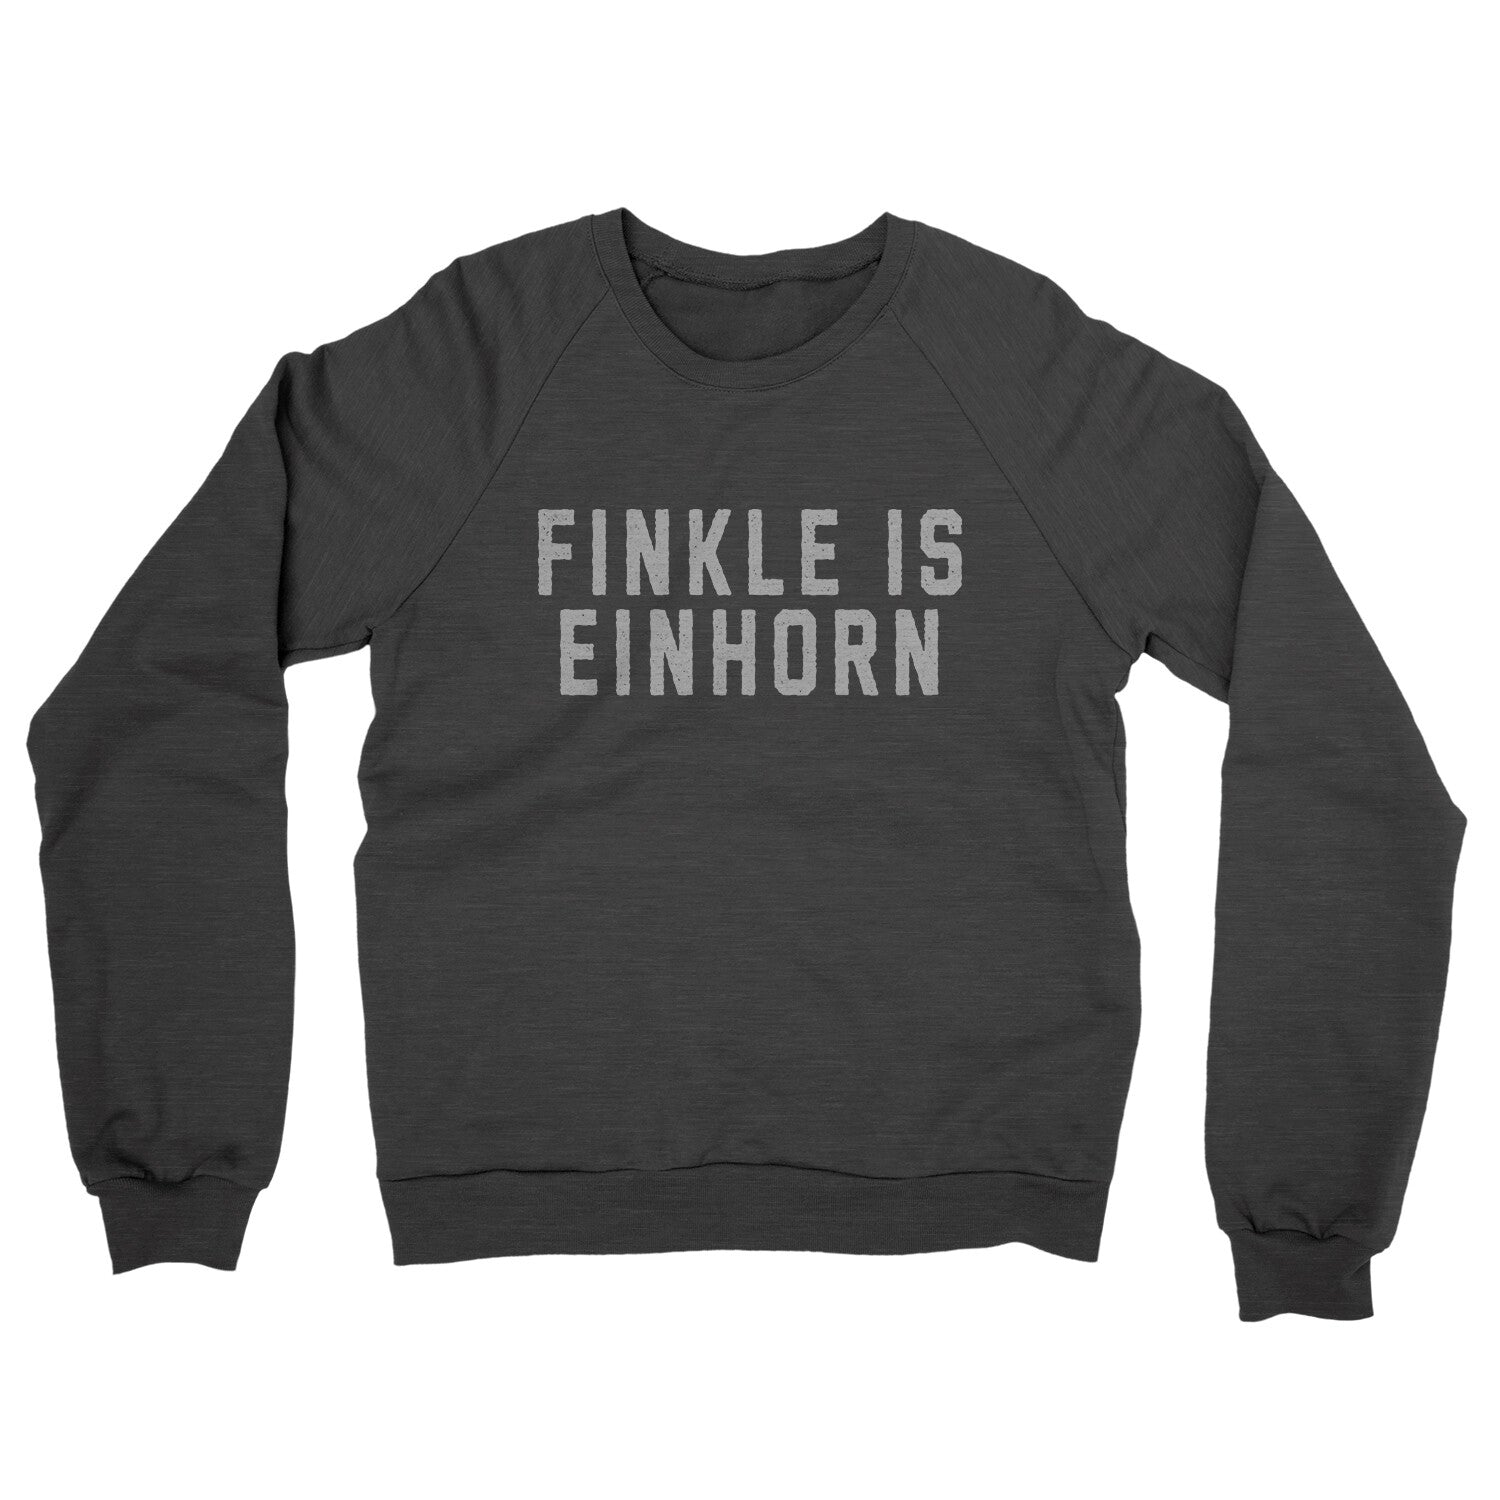 Finkle is Einhorn in Charcoal Heather Color